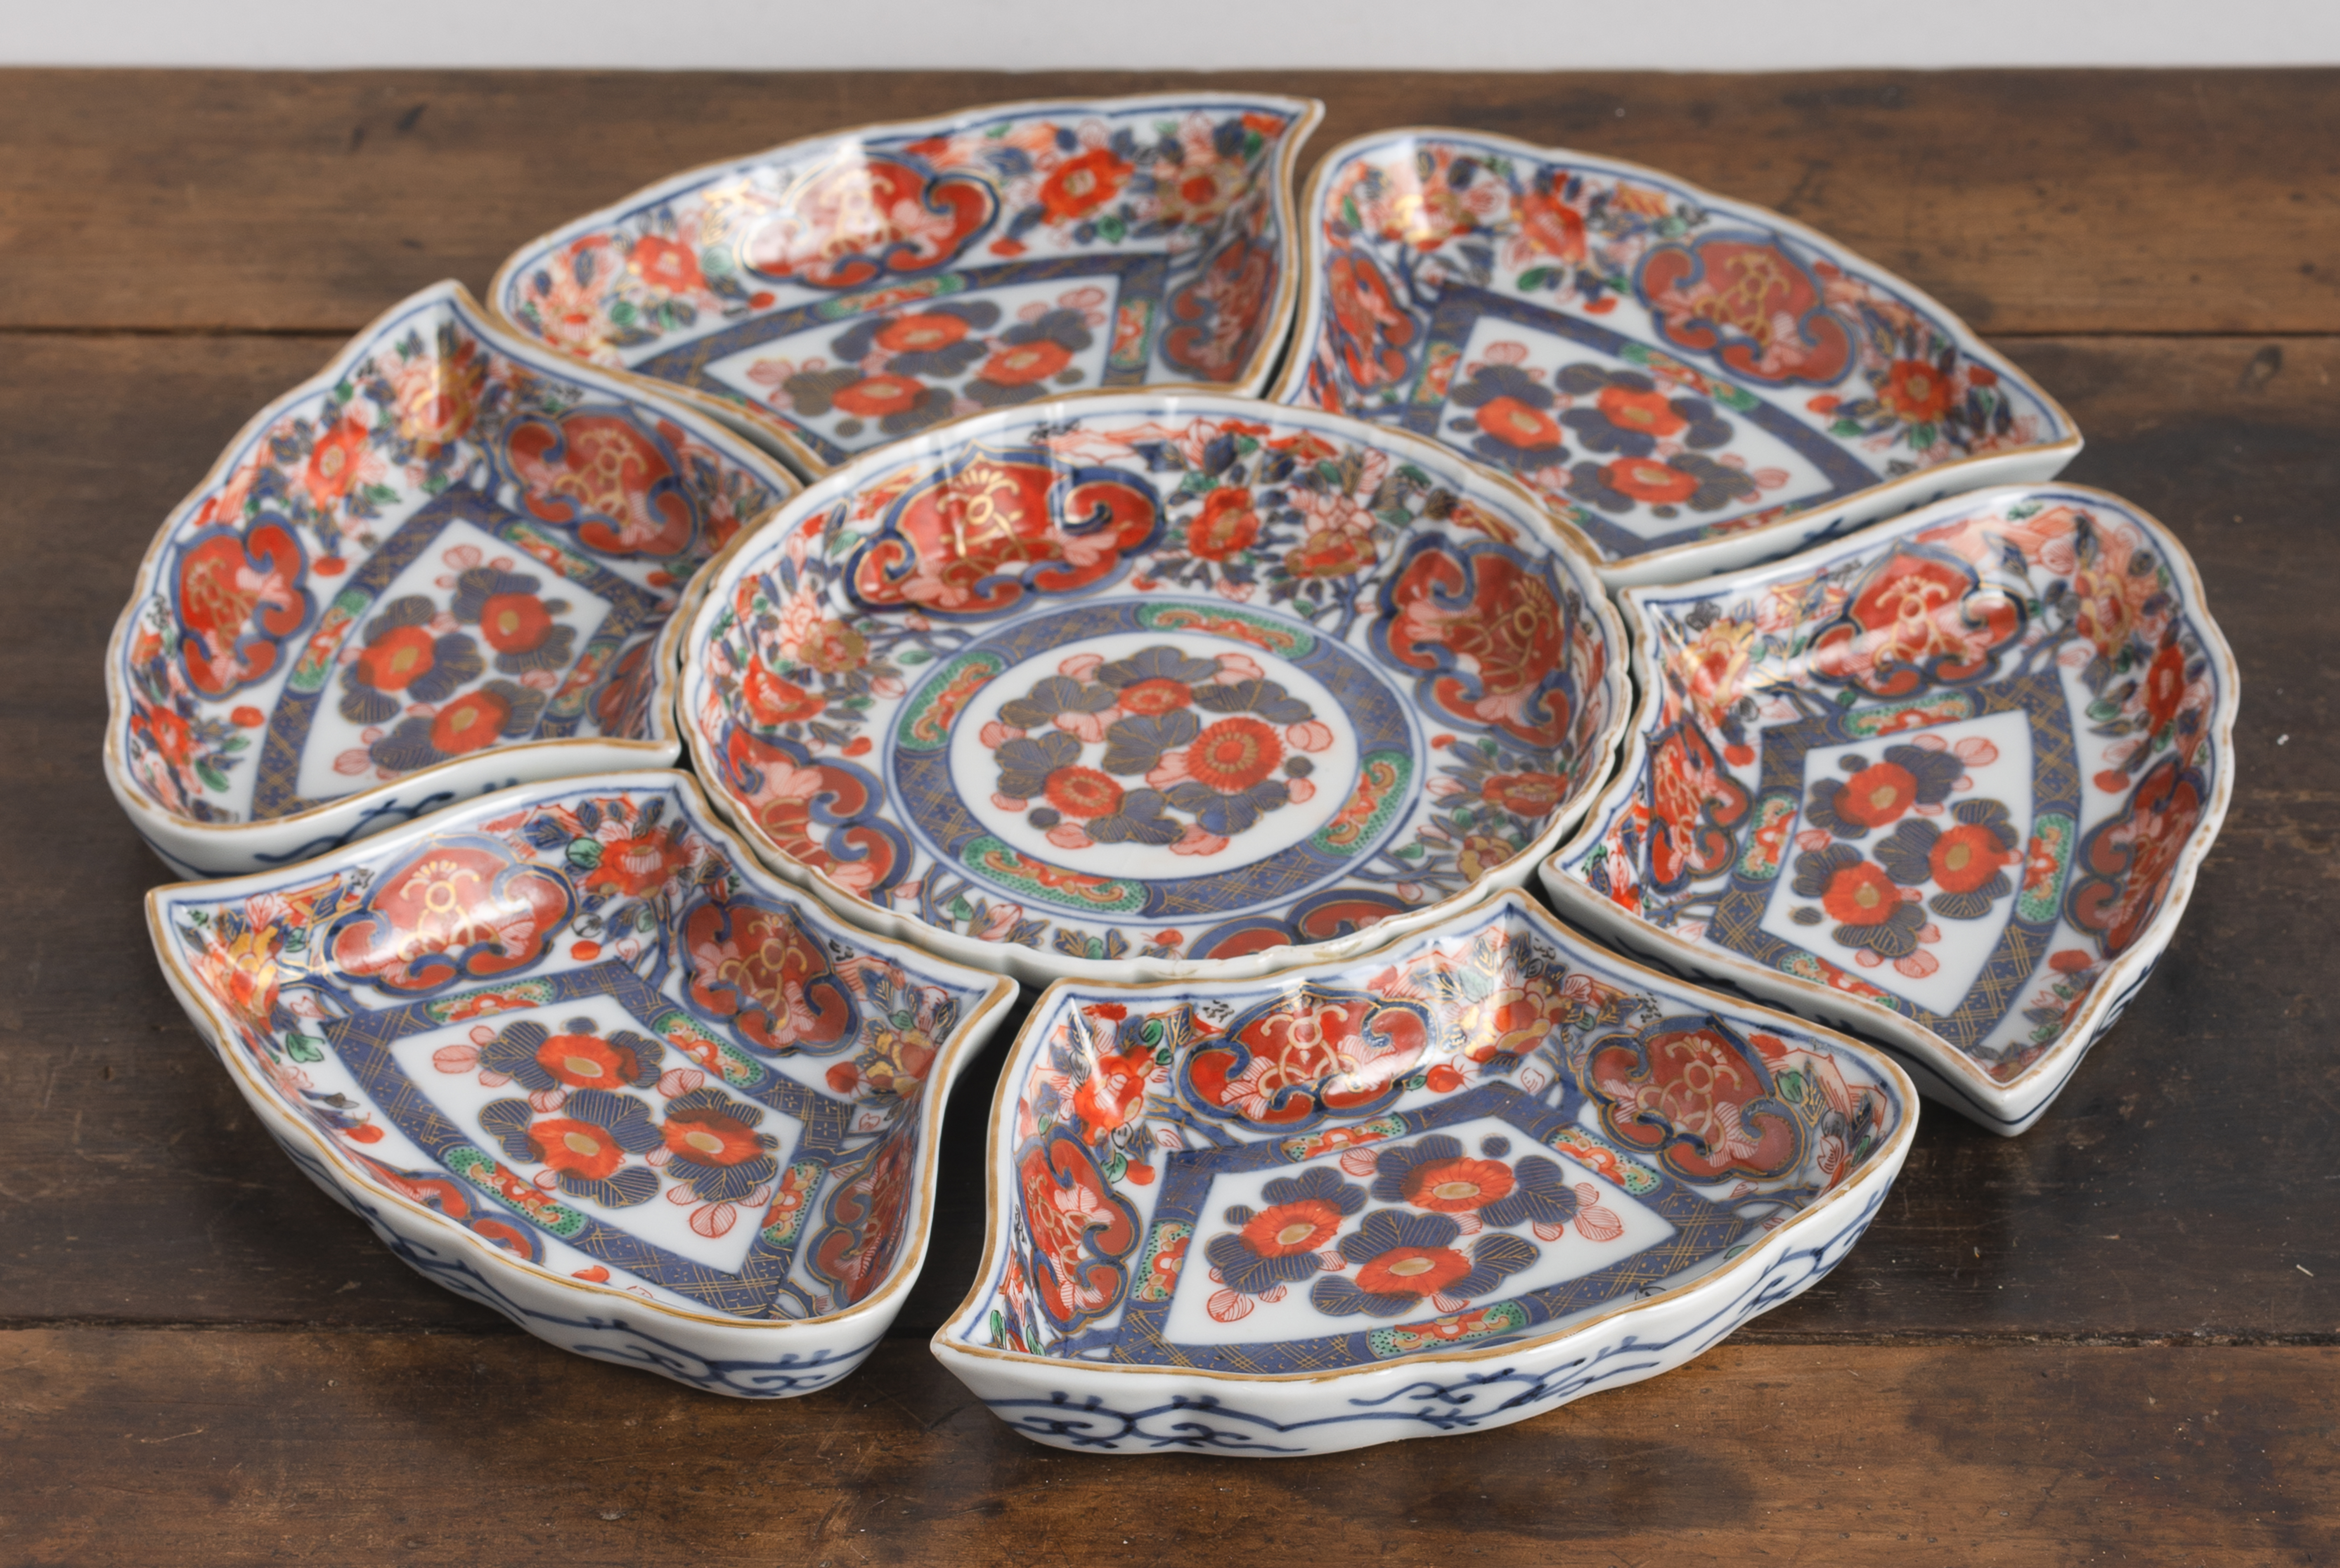 AN 'IMARI' PORCELAIN SWEETMEAT SET IN A LACQUER BOX - Image 3 of 4